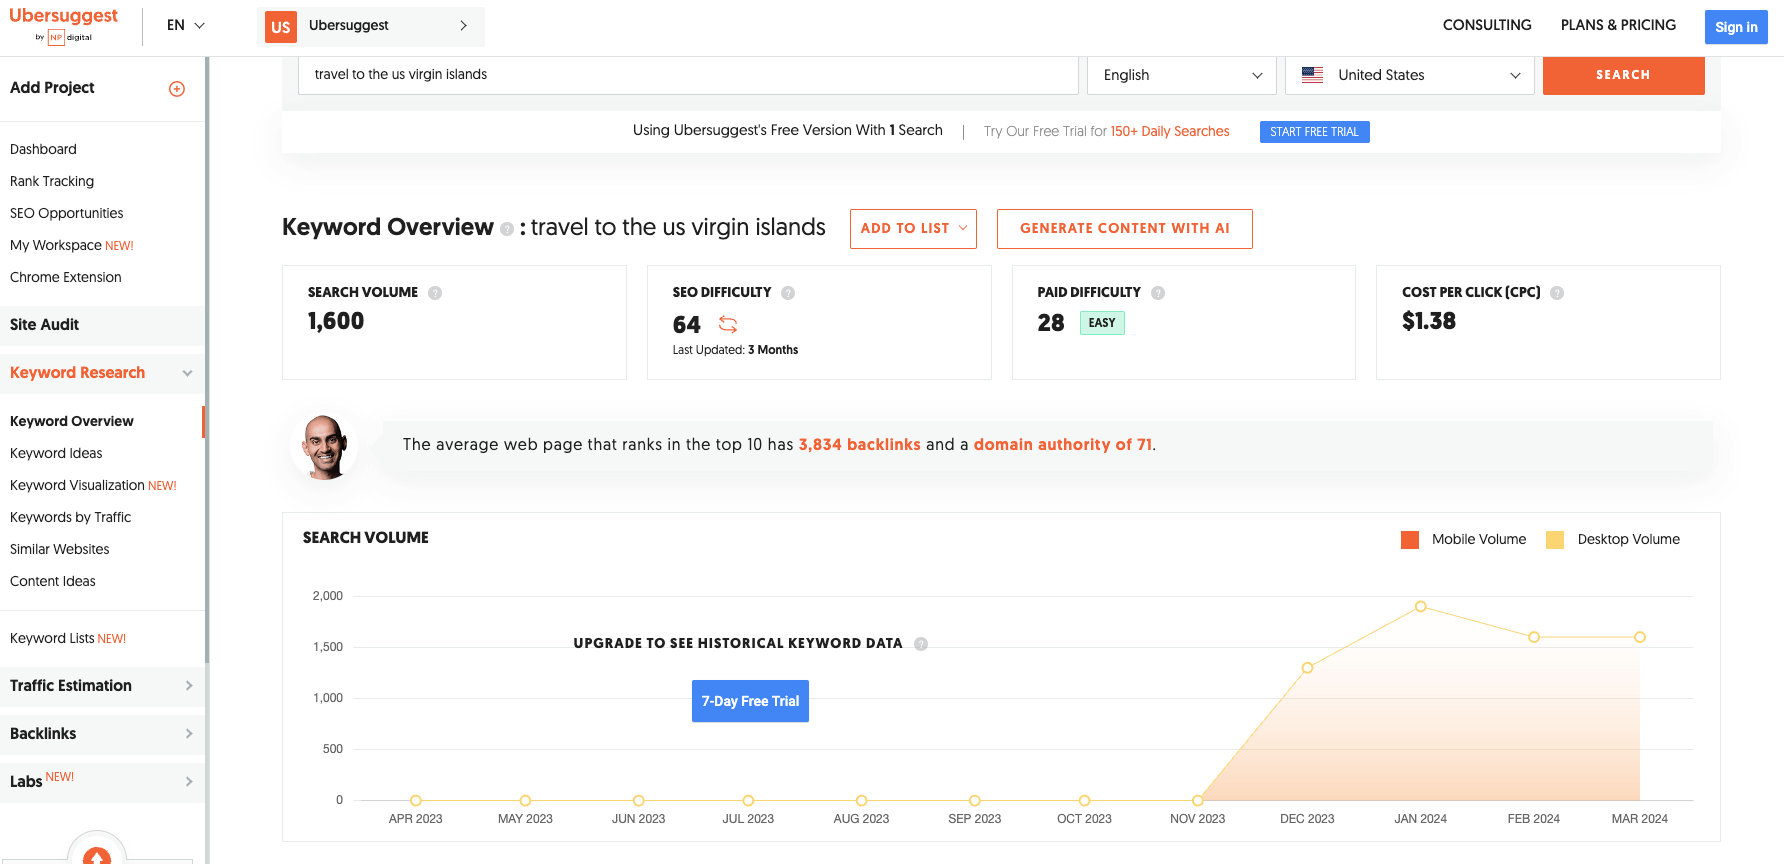 The image shows the user interface for keyword research on the Ubersuggest website. The data reveals search volume, SEO difficulty, and cost per click of that keyword.